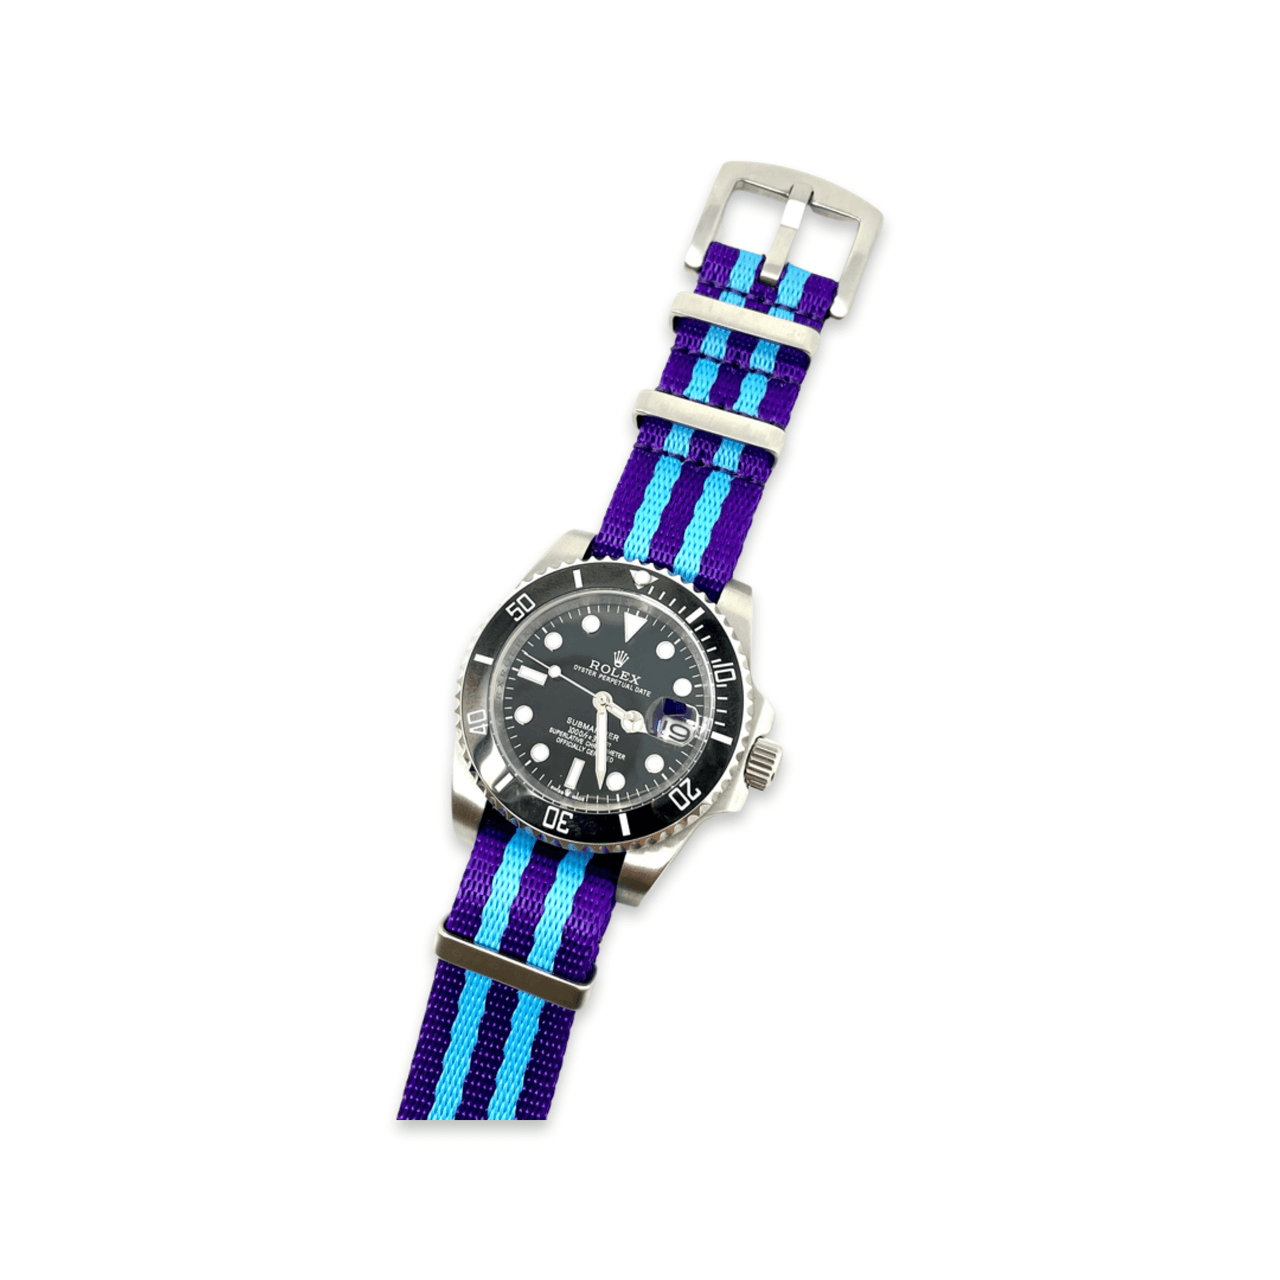 Premium Thick Woven Military Style Watch Strap - Purple Blue Stripes